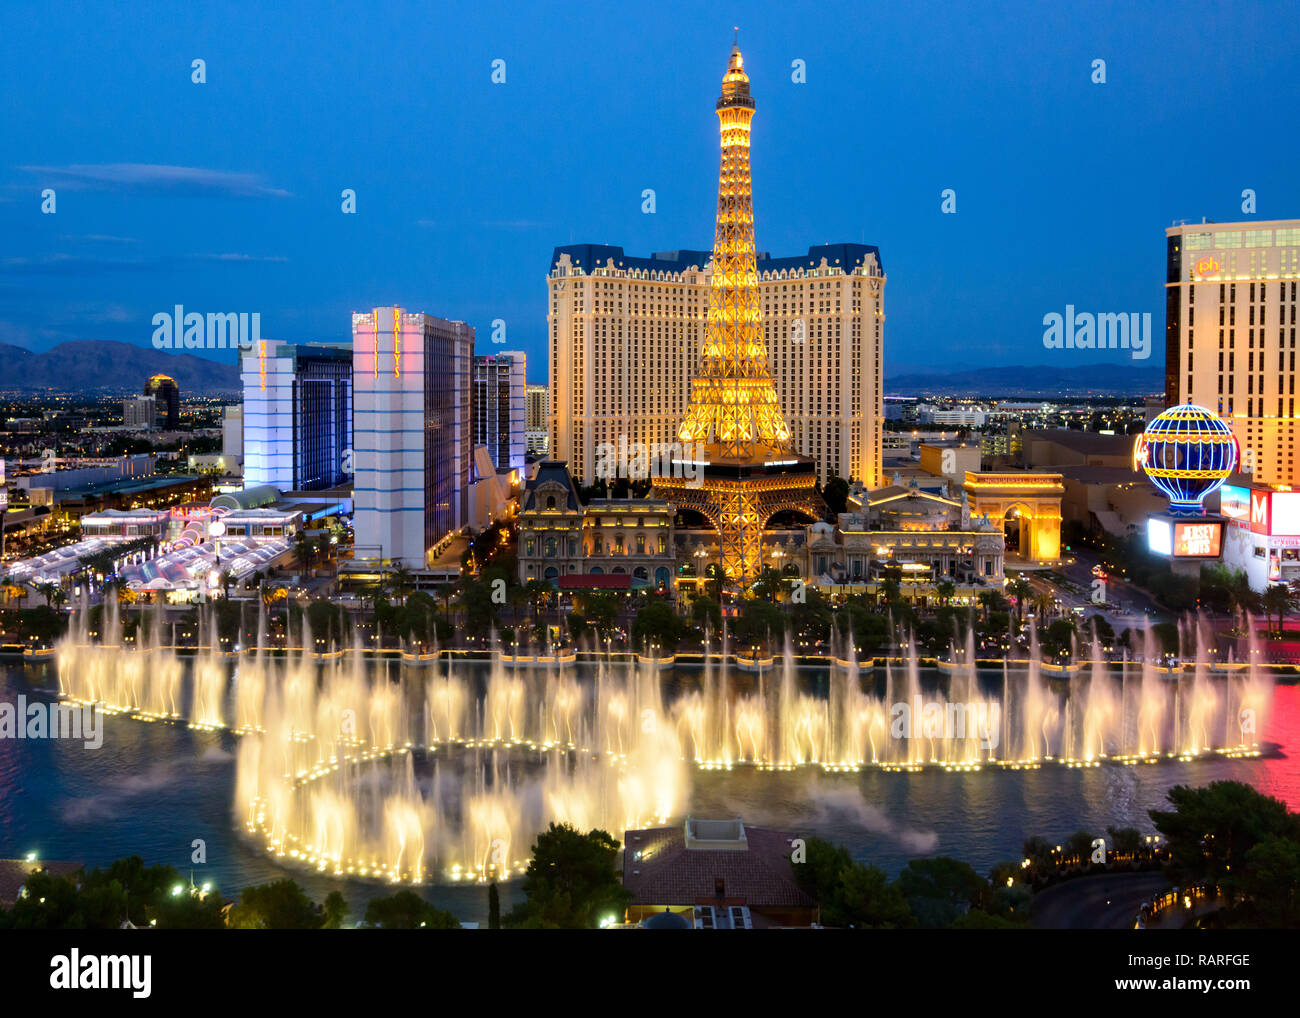 LAS VEGAS, NV – OCTOBER 18: The Grand Opening of the Bellagio Hotel in Las  Vegas, Nevada on October 18, 1998 Stock Photo - Alamy